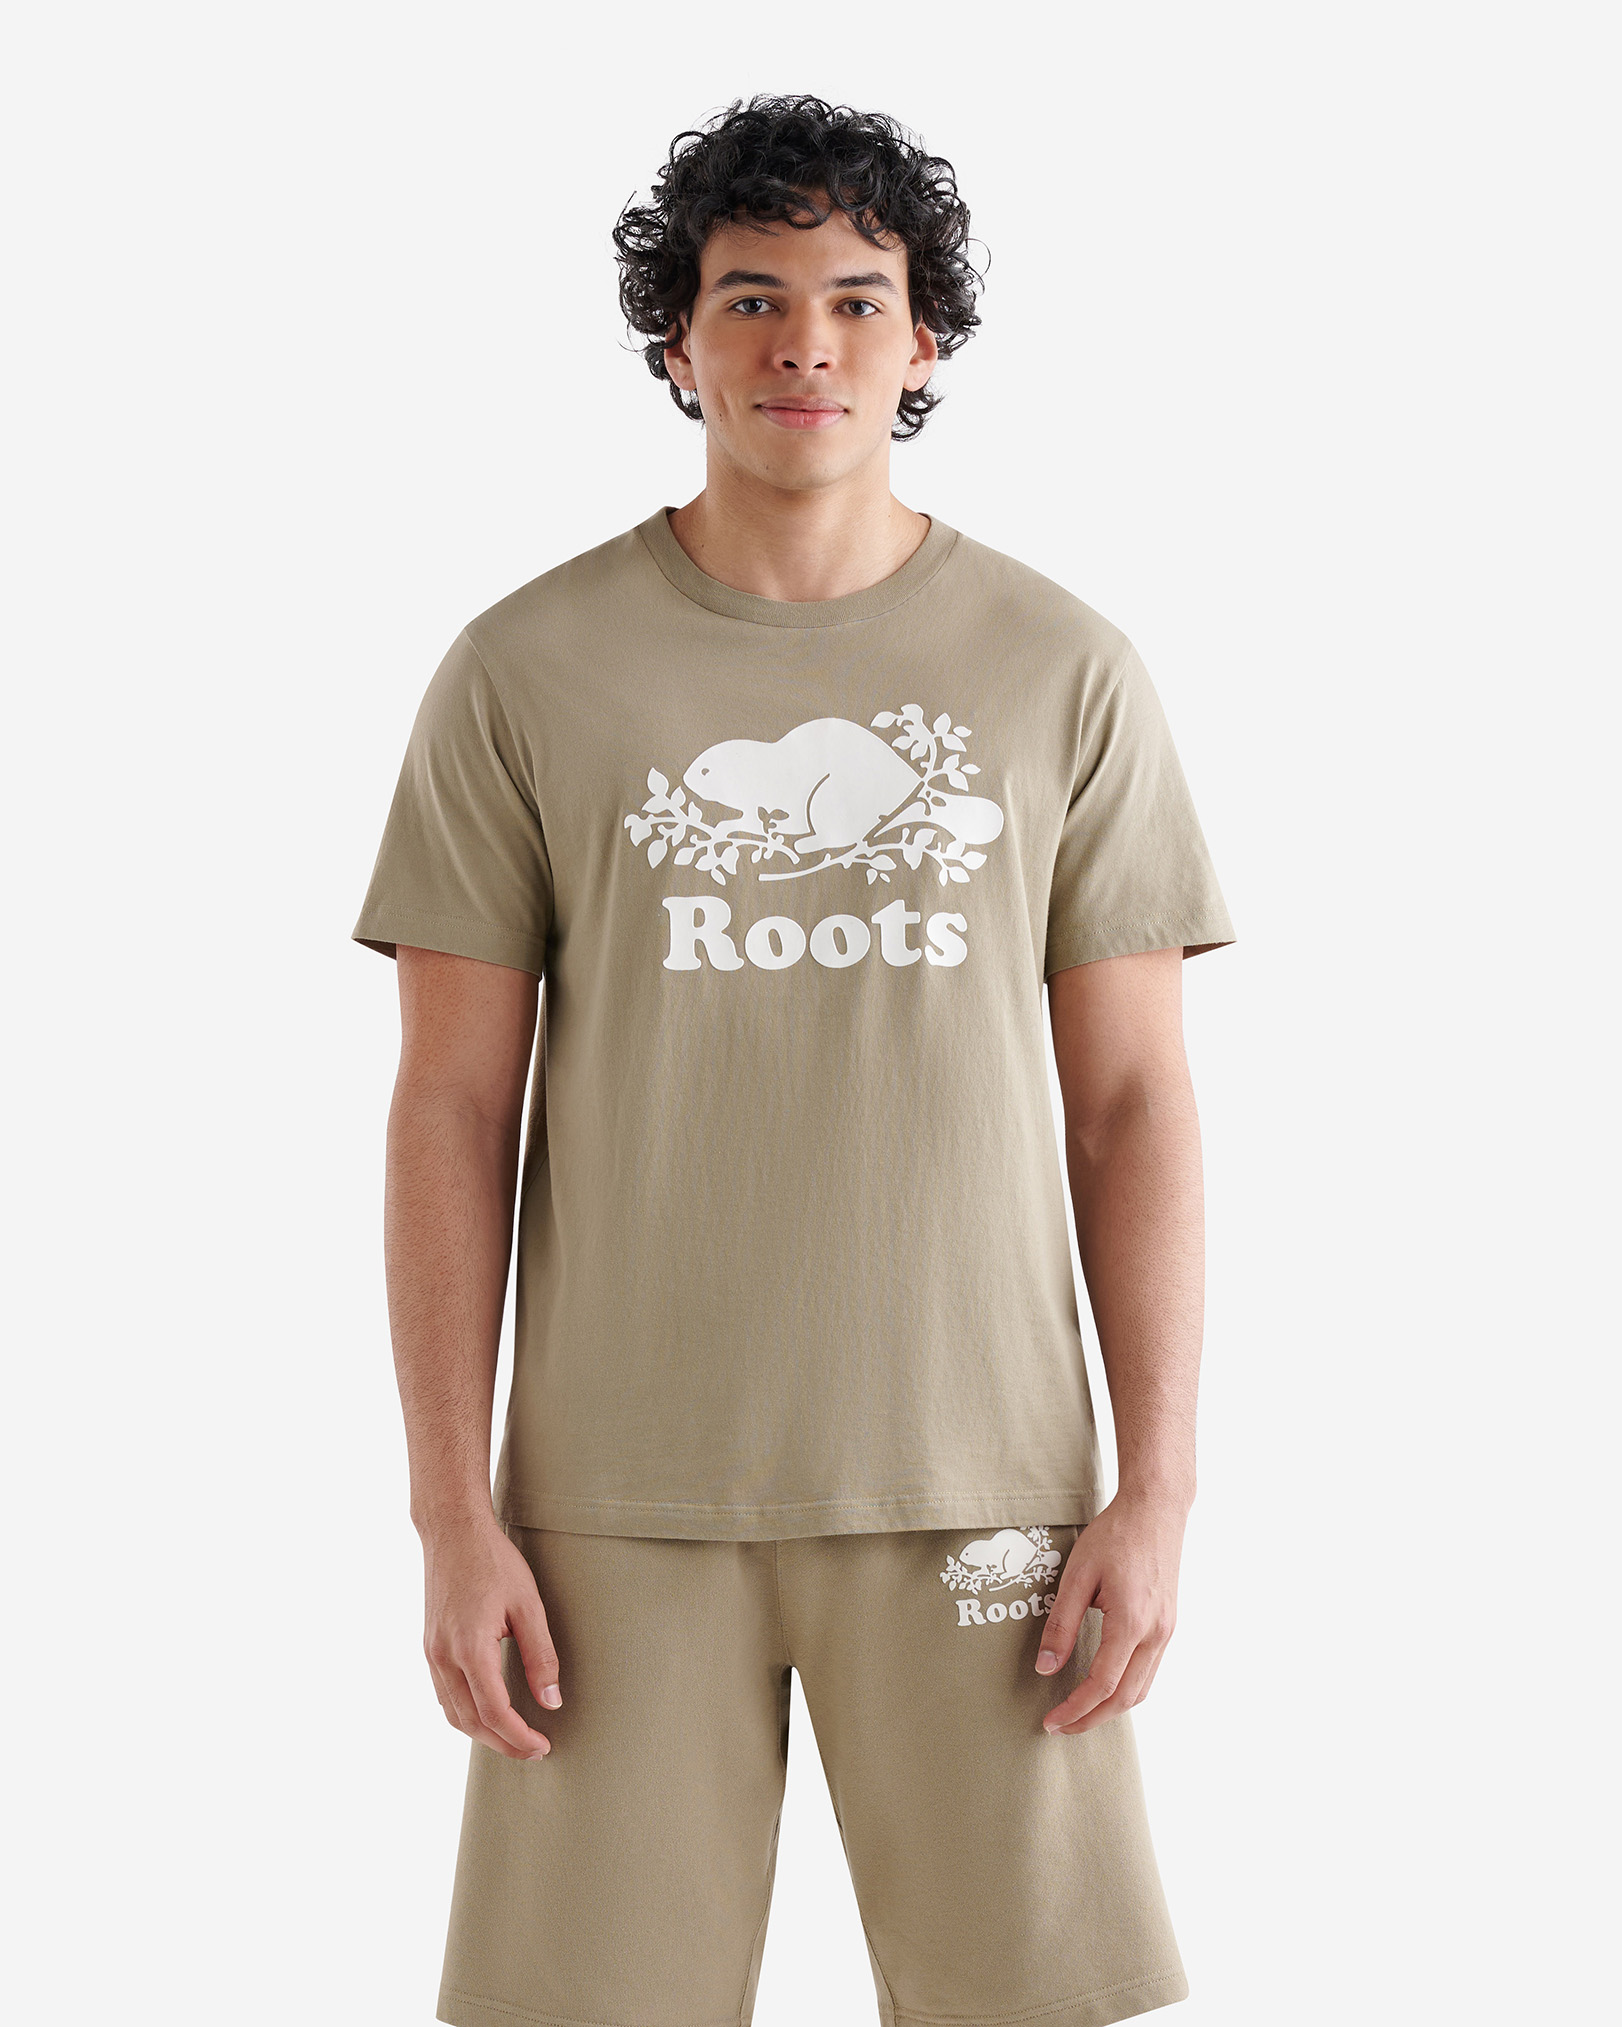 Roots Men's Organic Cooper Beaver T-Shirt in Silver Sage